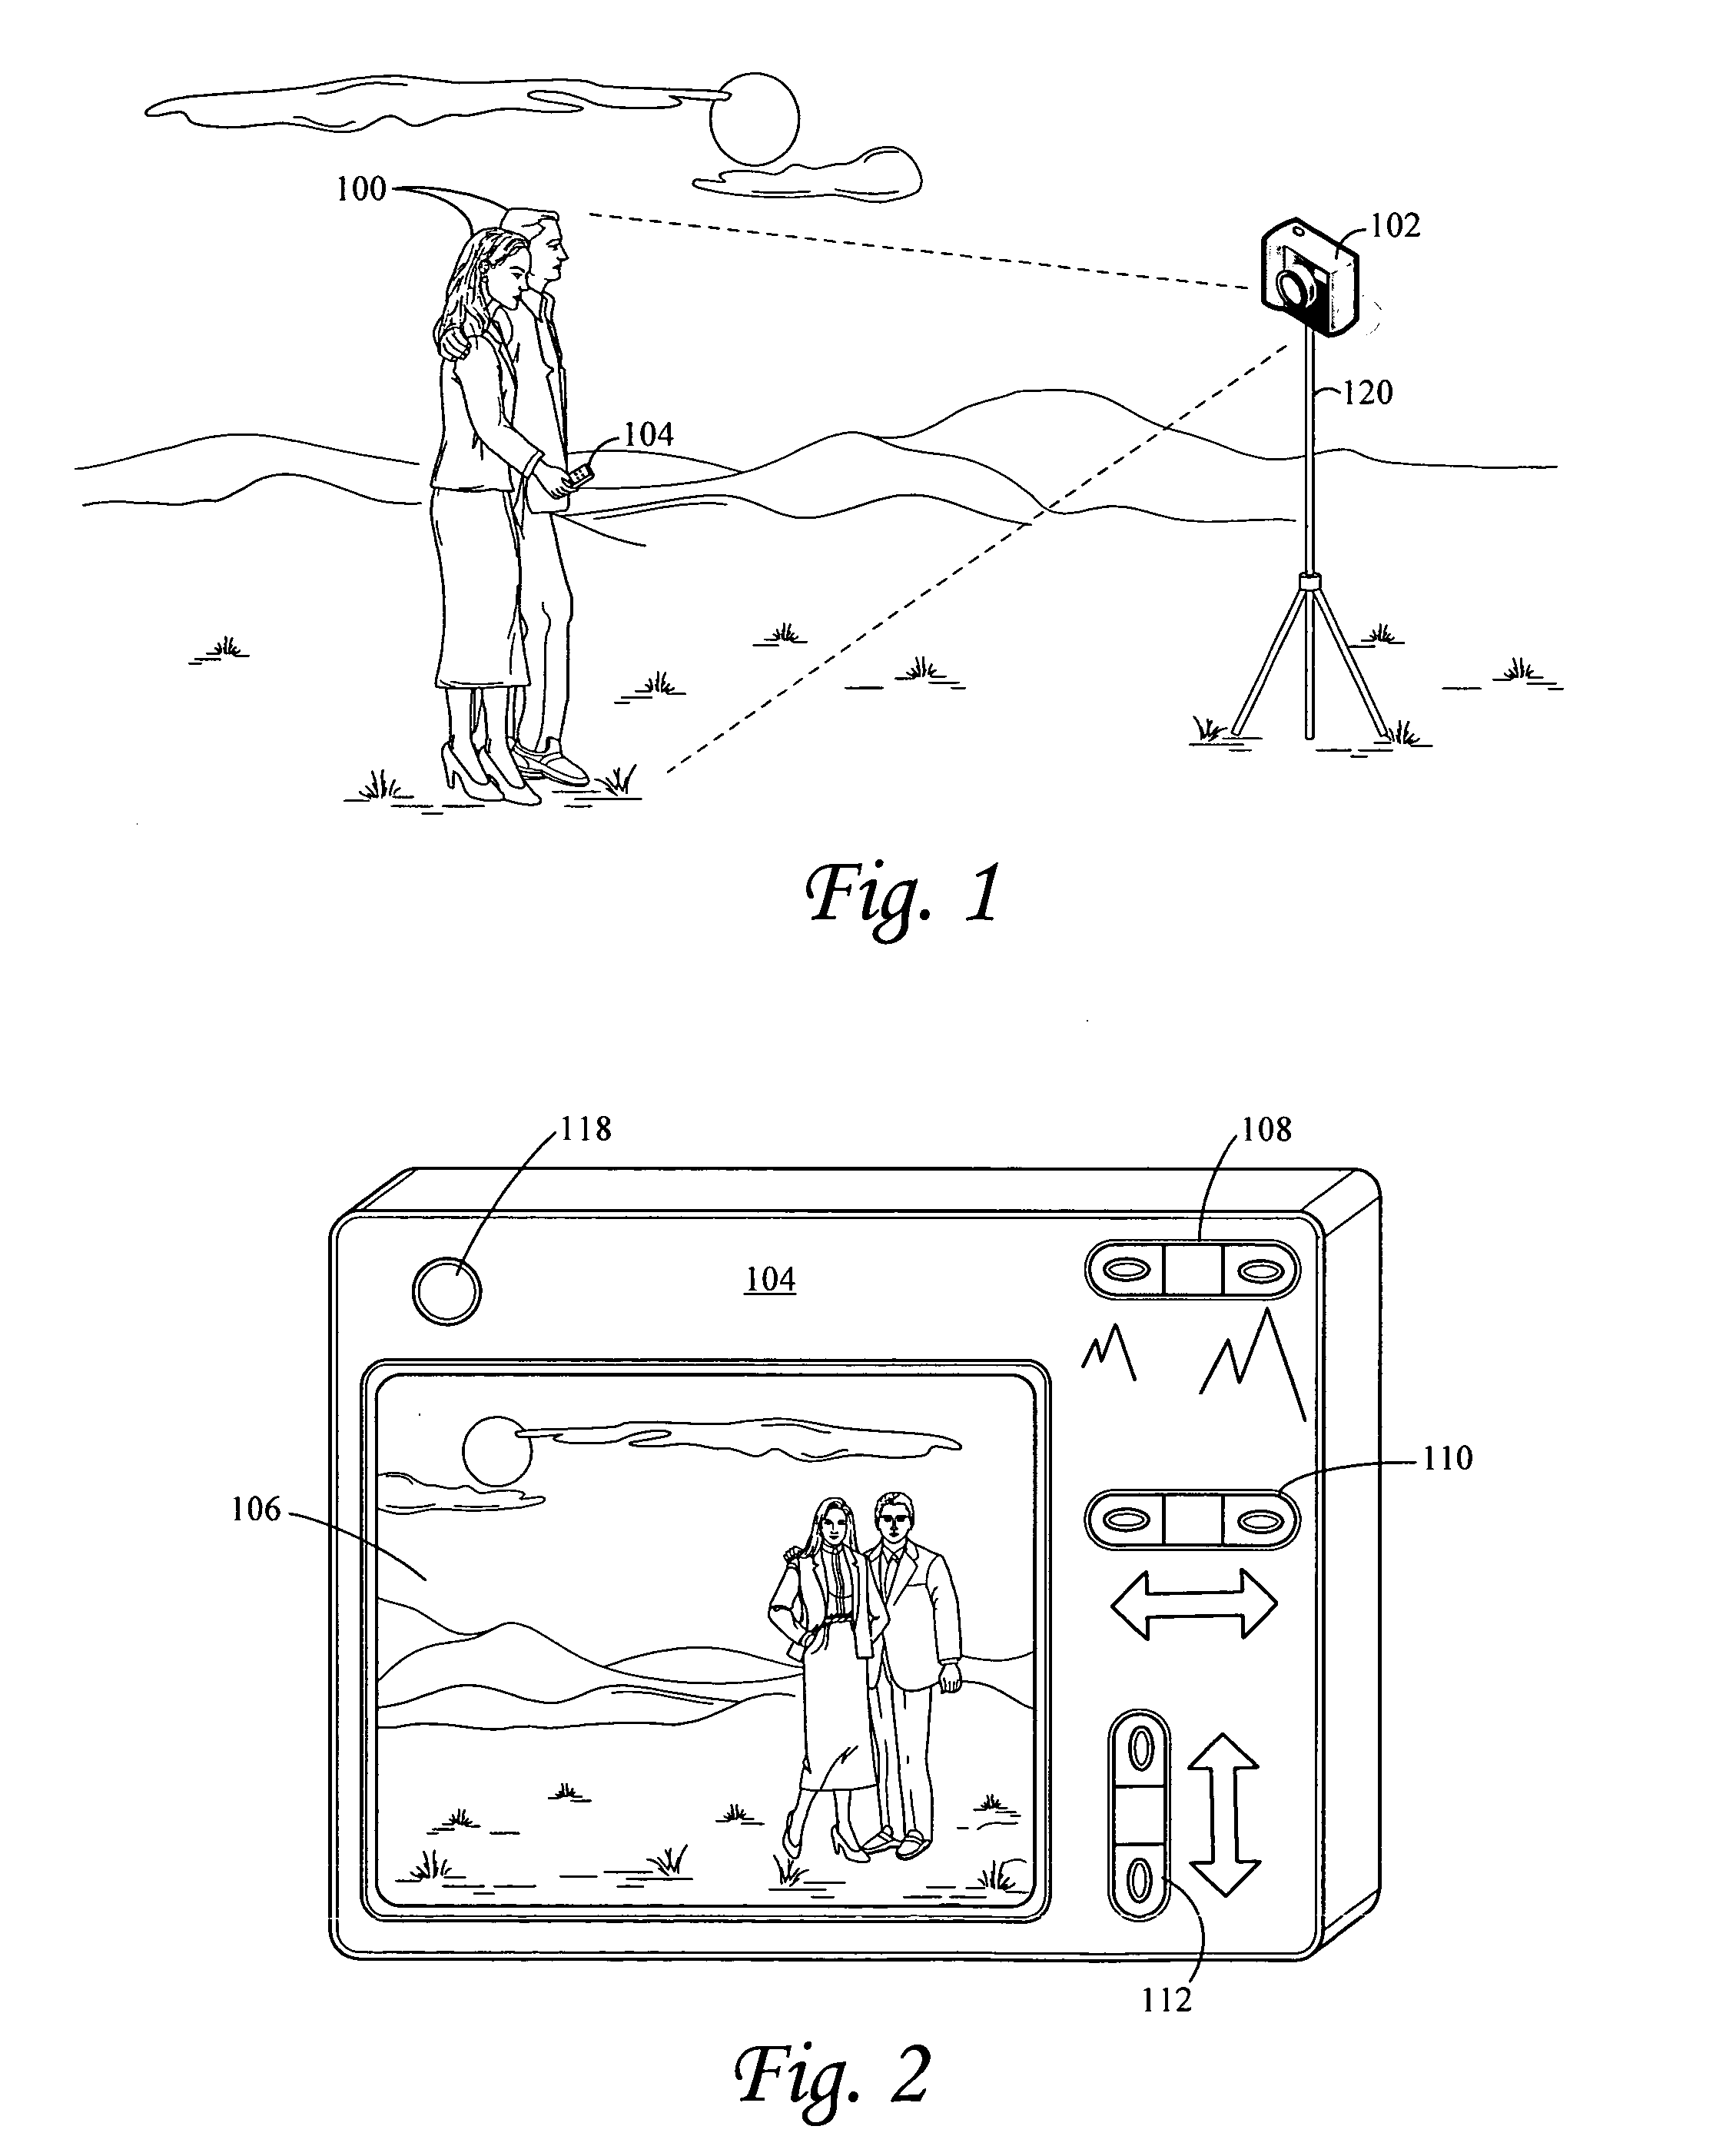 Remote view and controller for a camera